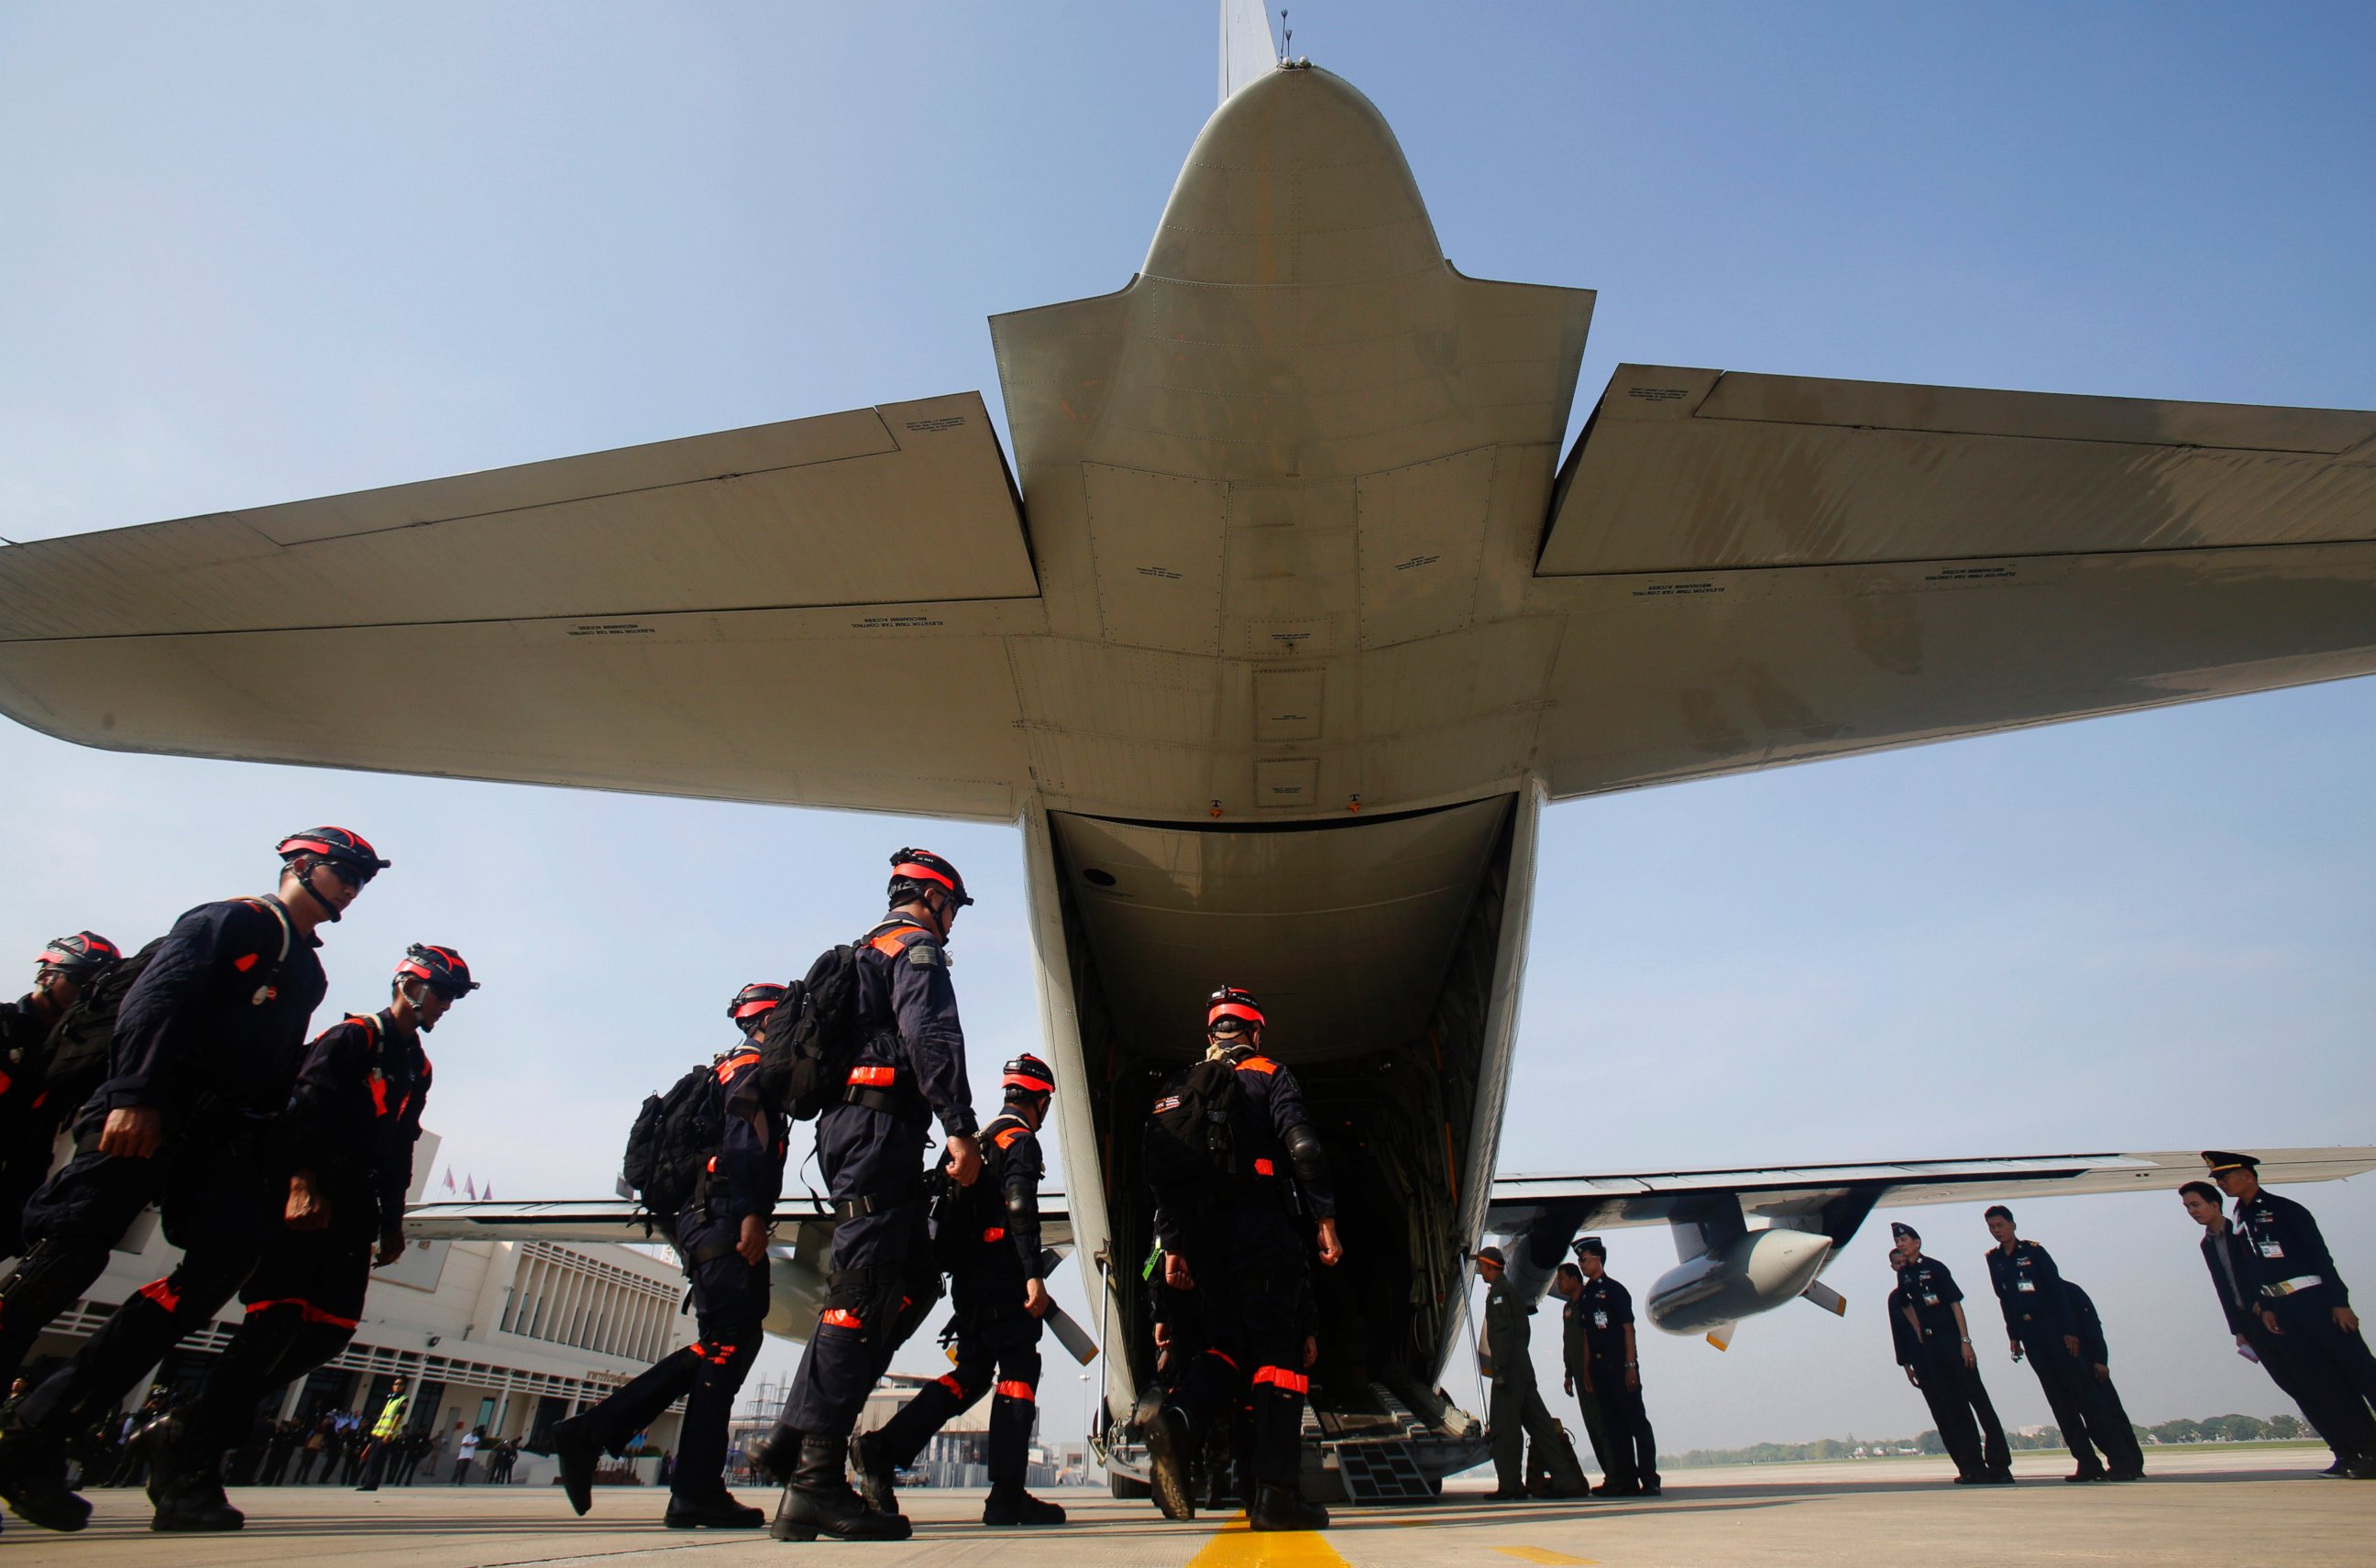 PHOTO: Thai military rescue team members board a plane at a military airport in Bangkok, Thailand, to assist in earthquake relief, April 28, 2015.